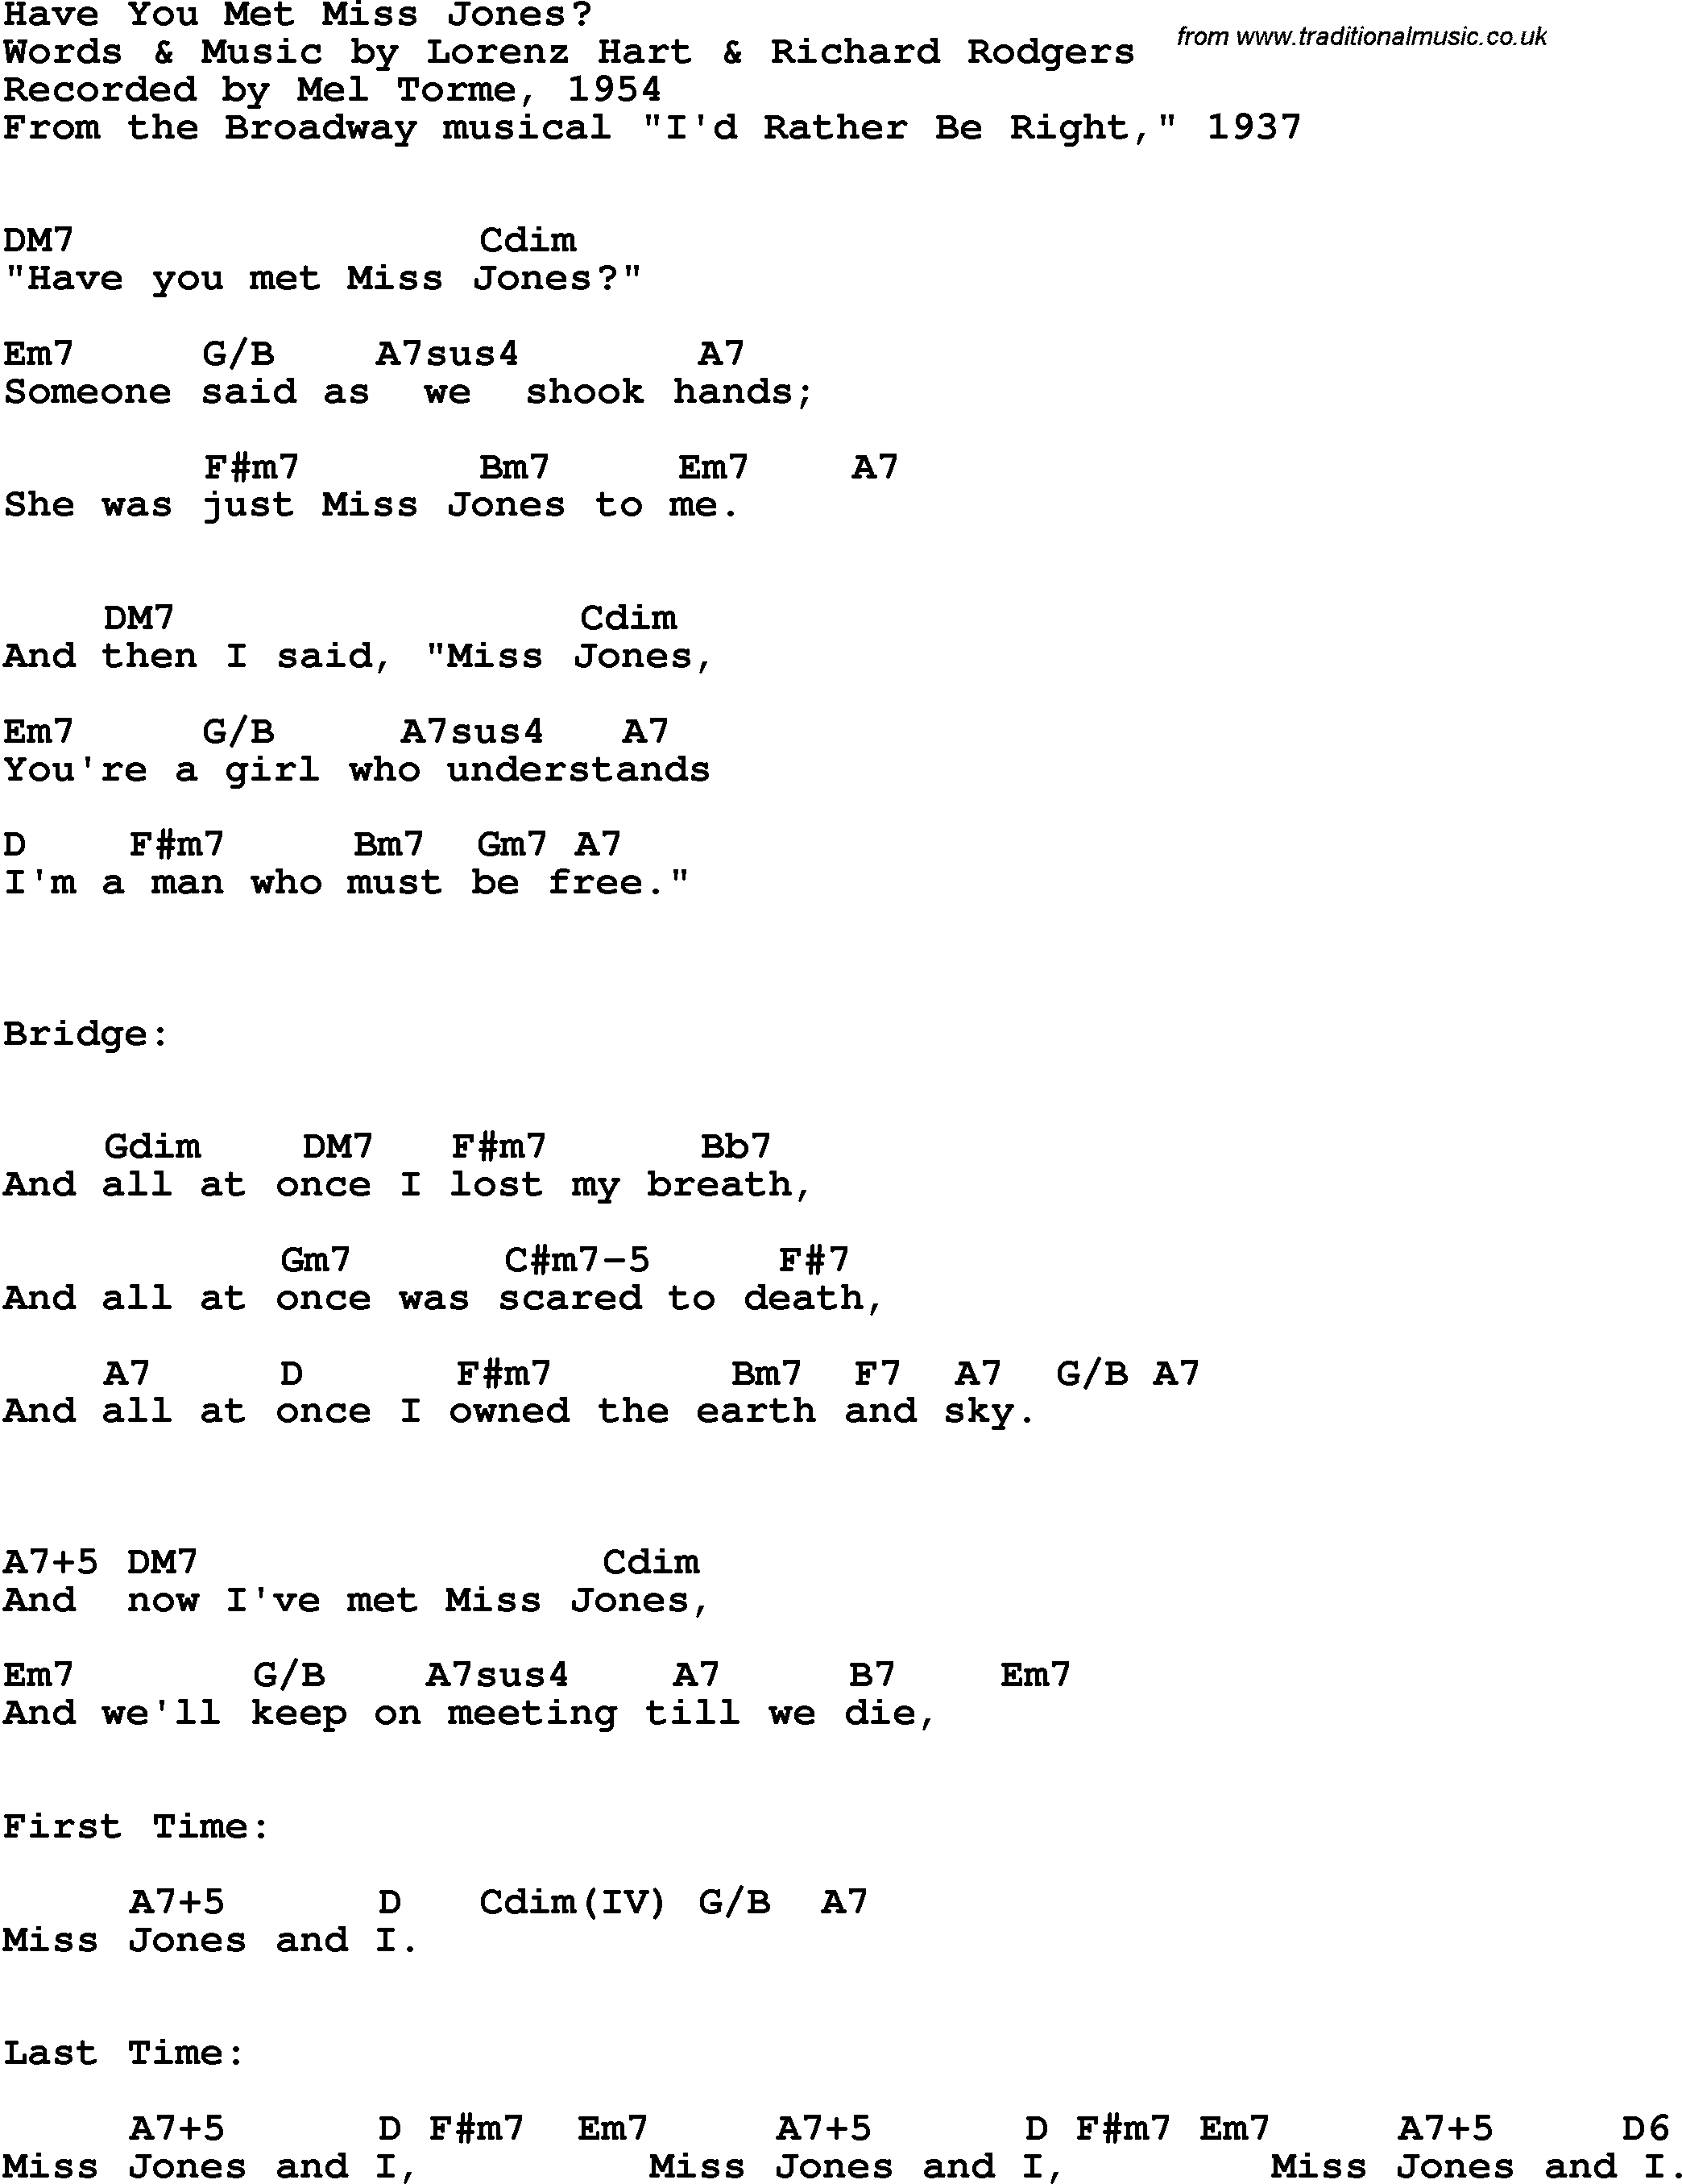 Song Lyrics with guitar chords for Have You Met Miss Jones - Mel Torme, 1954